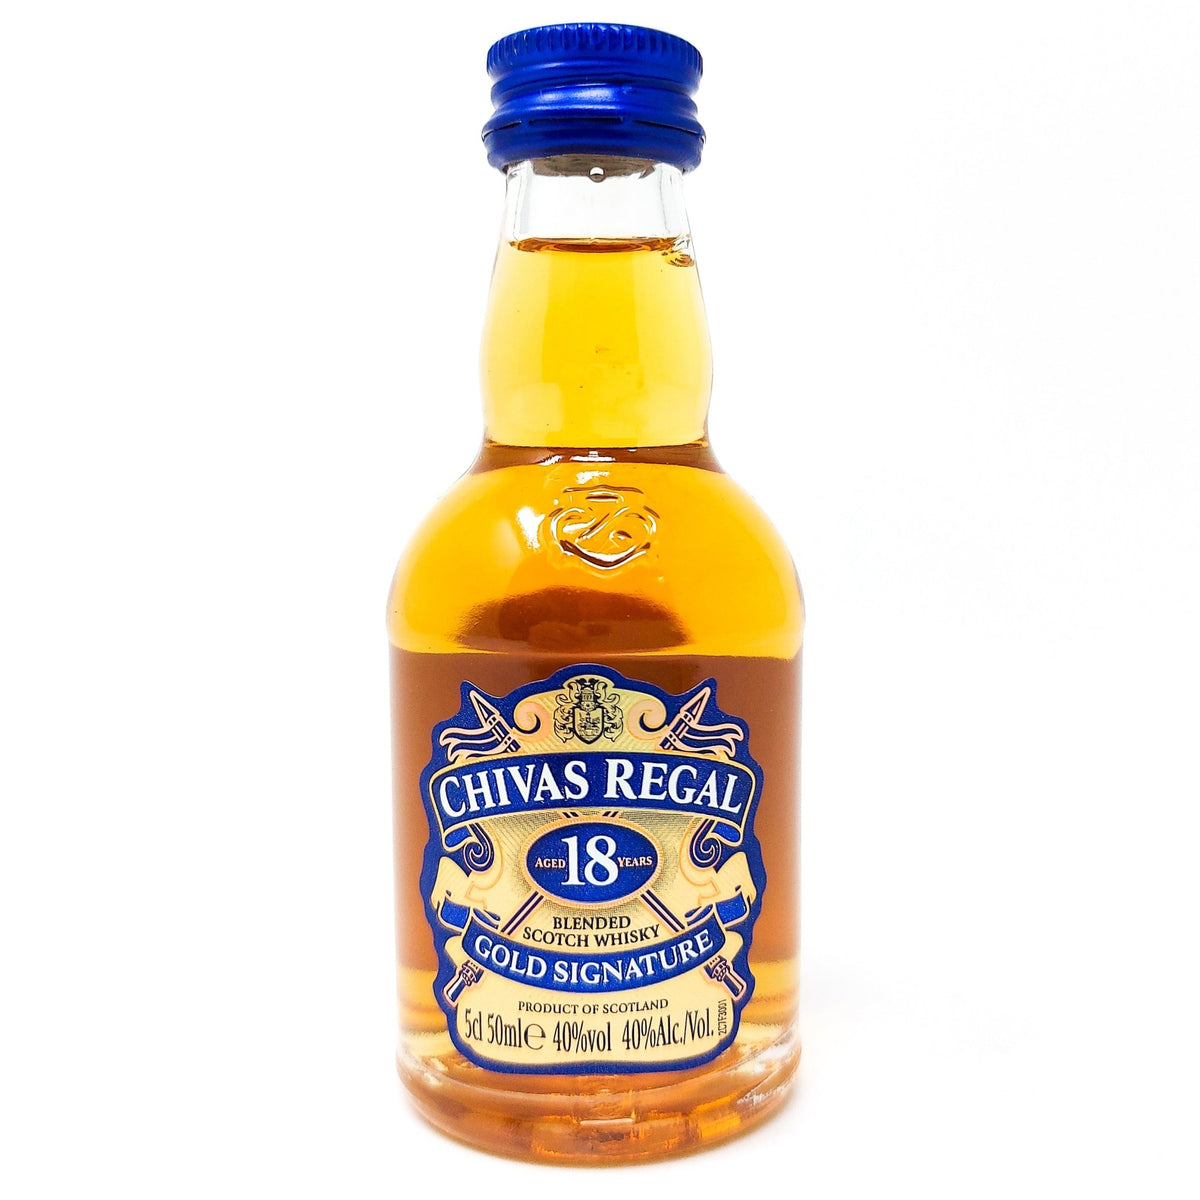 Chivas Regal Gold Signature 18 Year Old Blended Scotch Whisky 